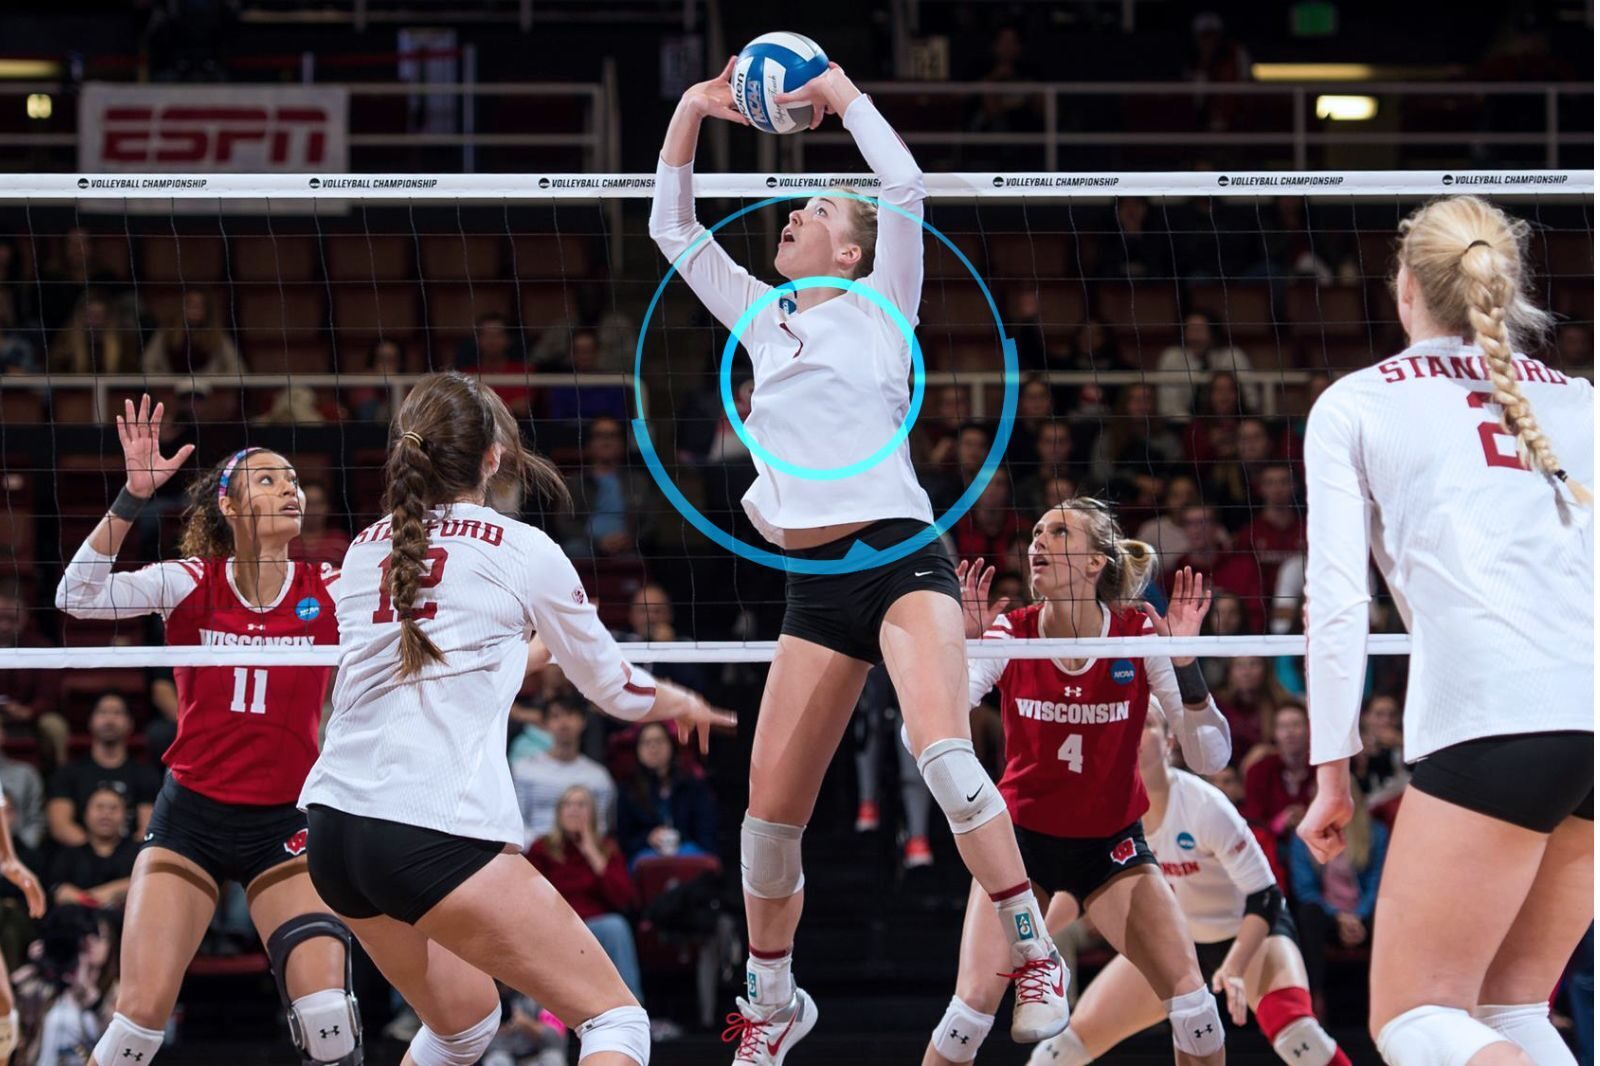 Stanford women's volleyball uses a combination of analytics and strength training methods to remain of the top teams in the NCAA.